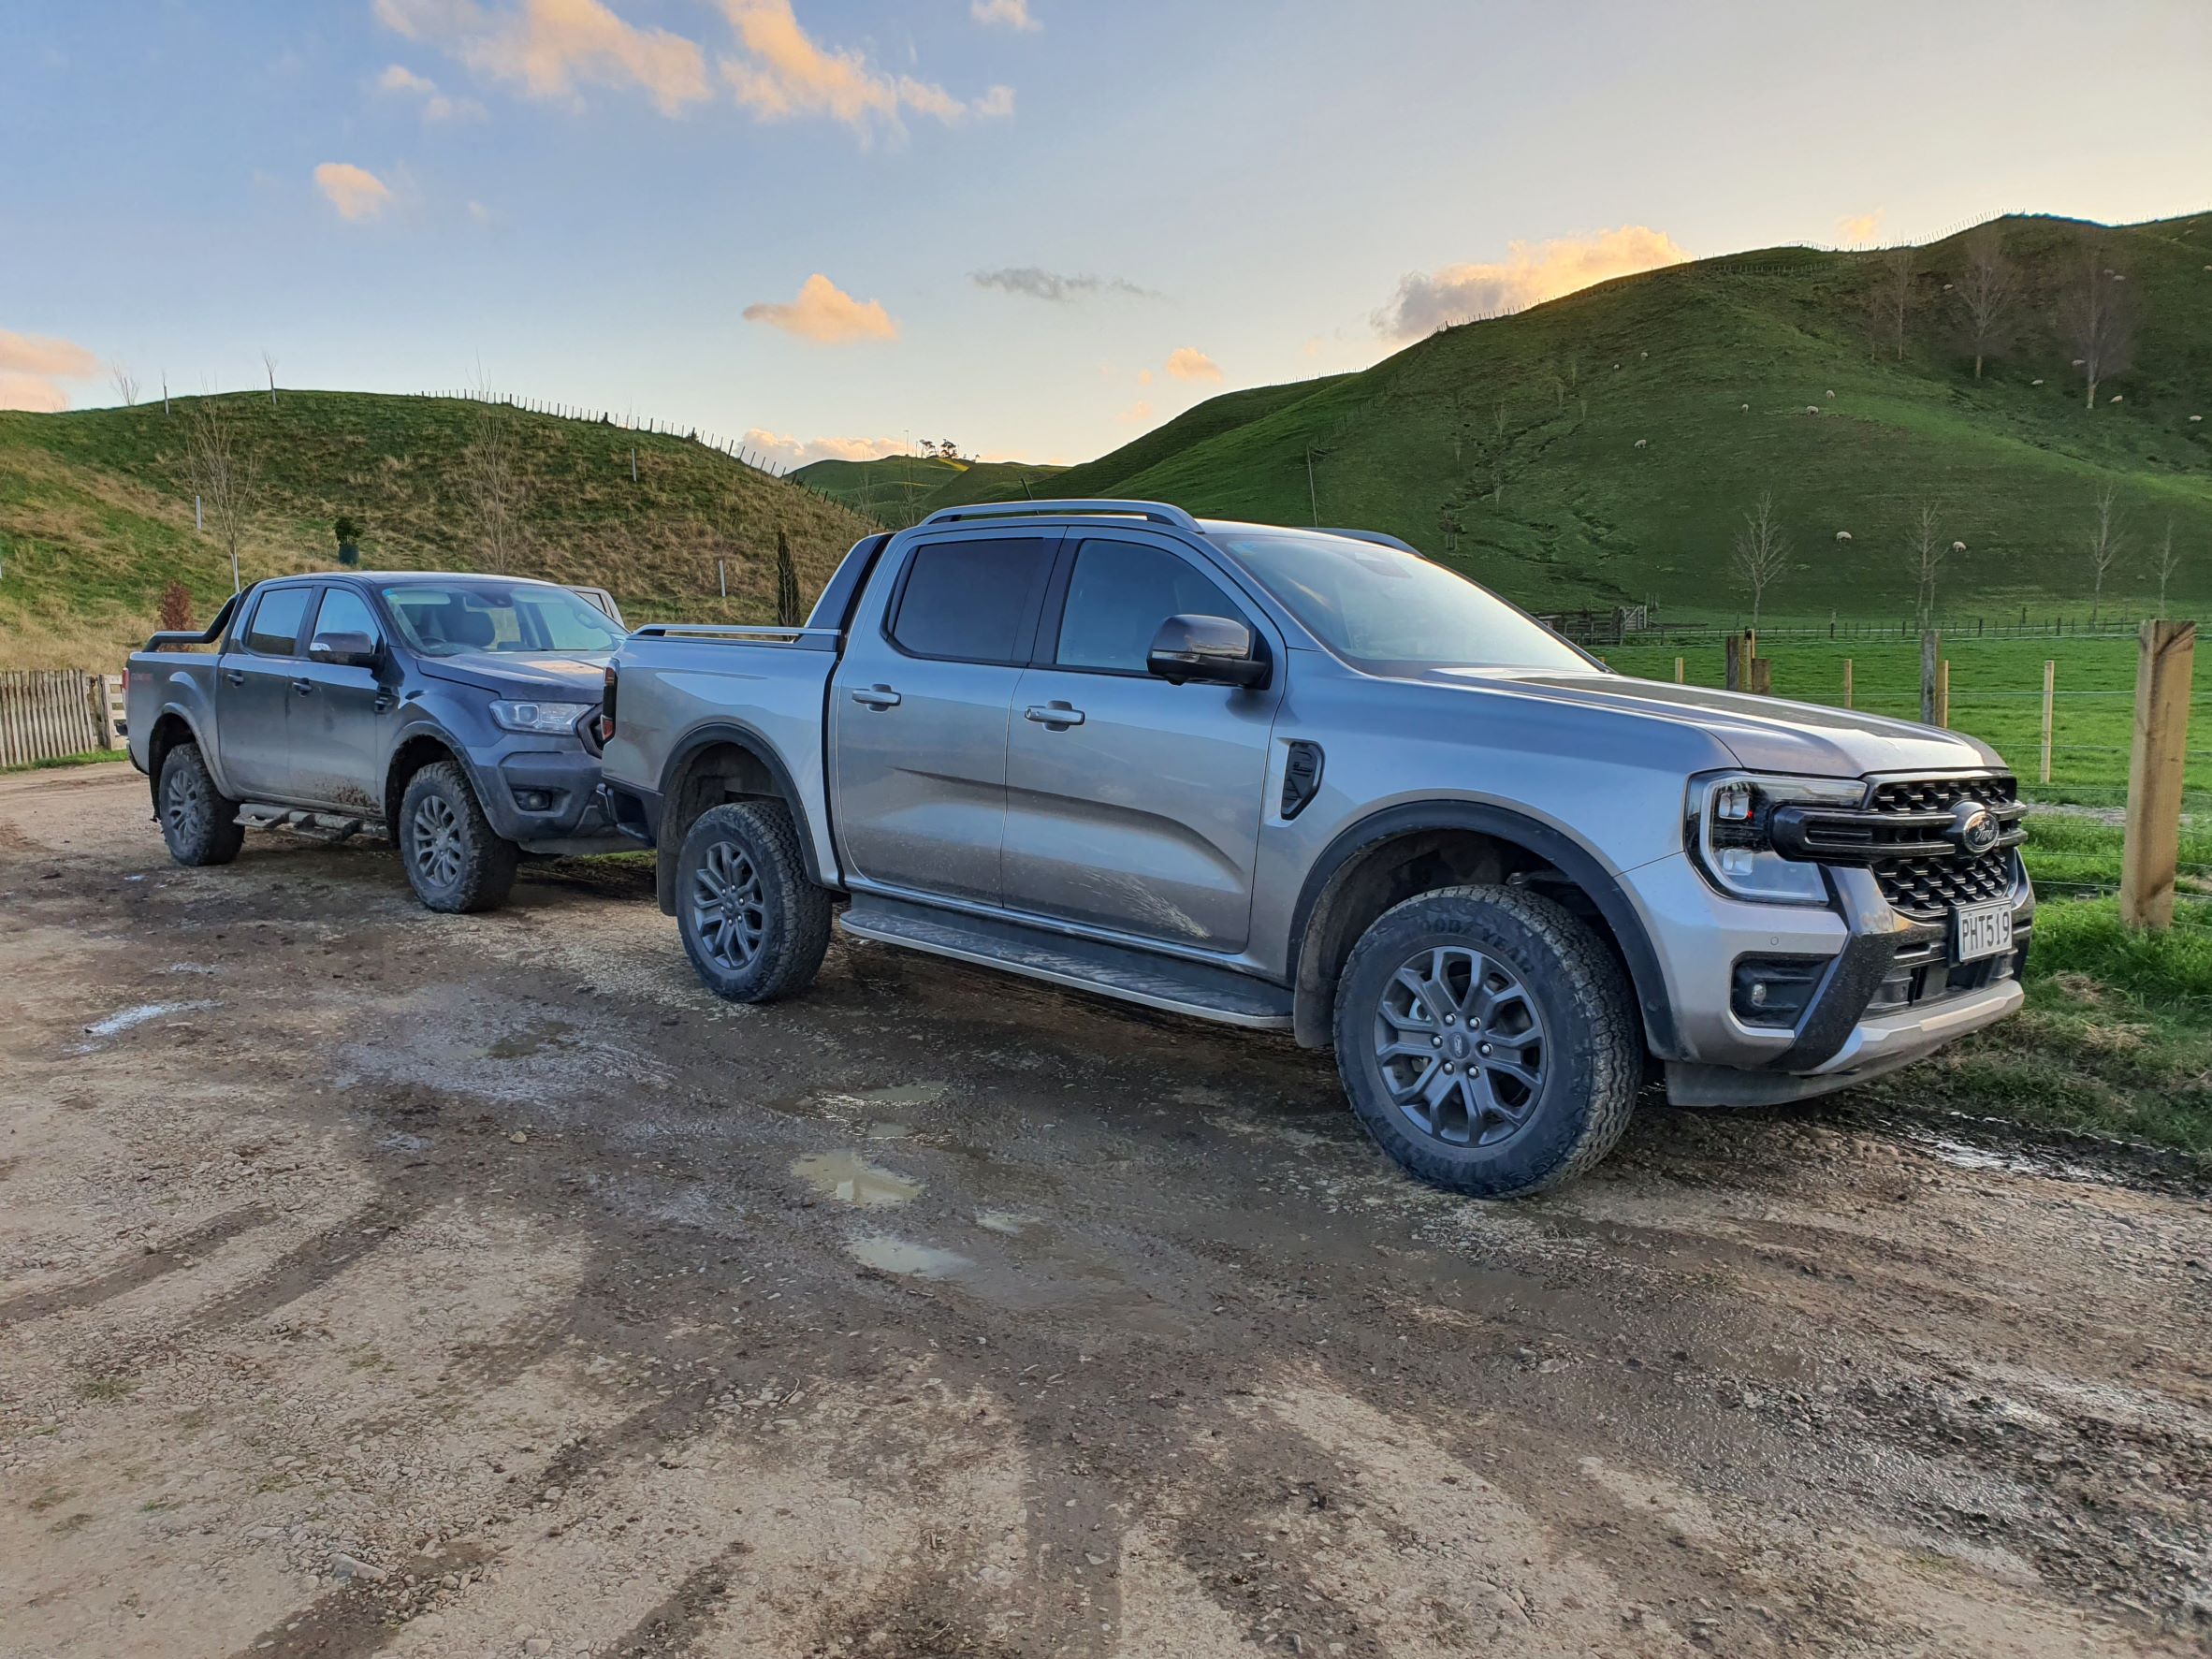 A new Ford Ranger Wiltrak in silver parked in front of an old Ford Ranger FX4 in grey